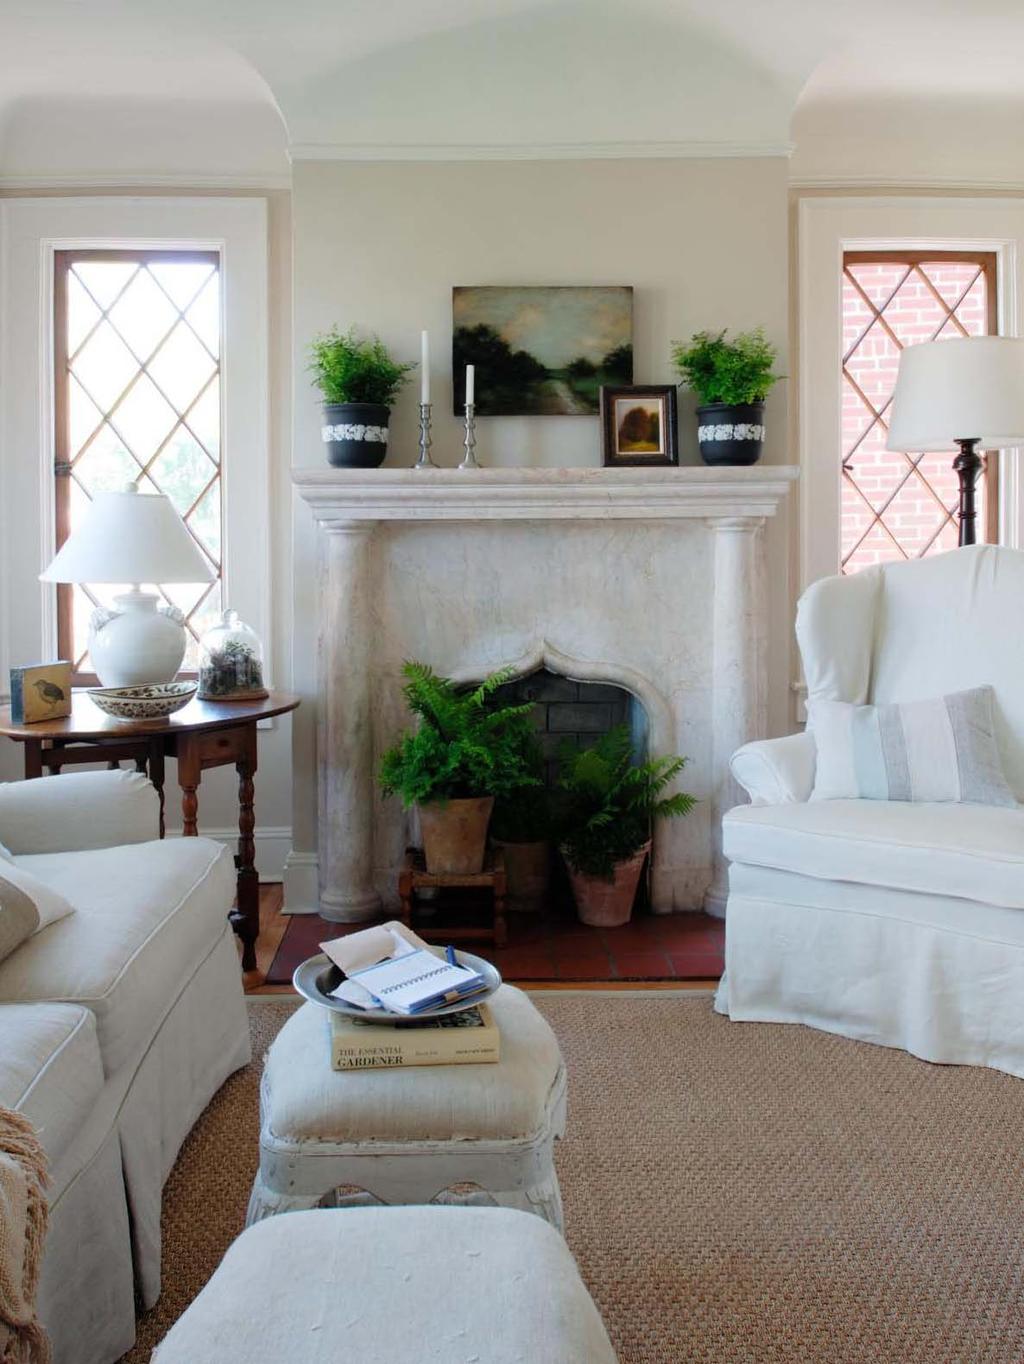 Homeowner Nikie Barfield collects antique ironstone and Wedgwood, left, for its graceful lines and creamy sheen.